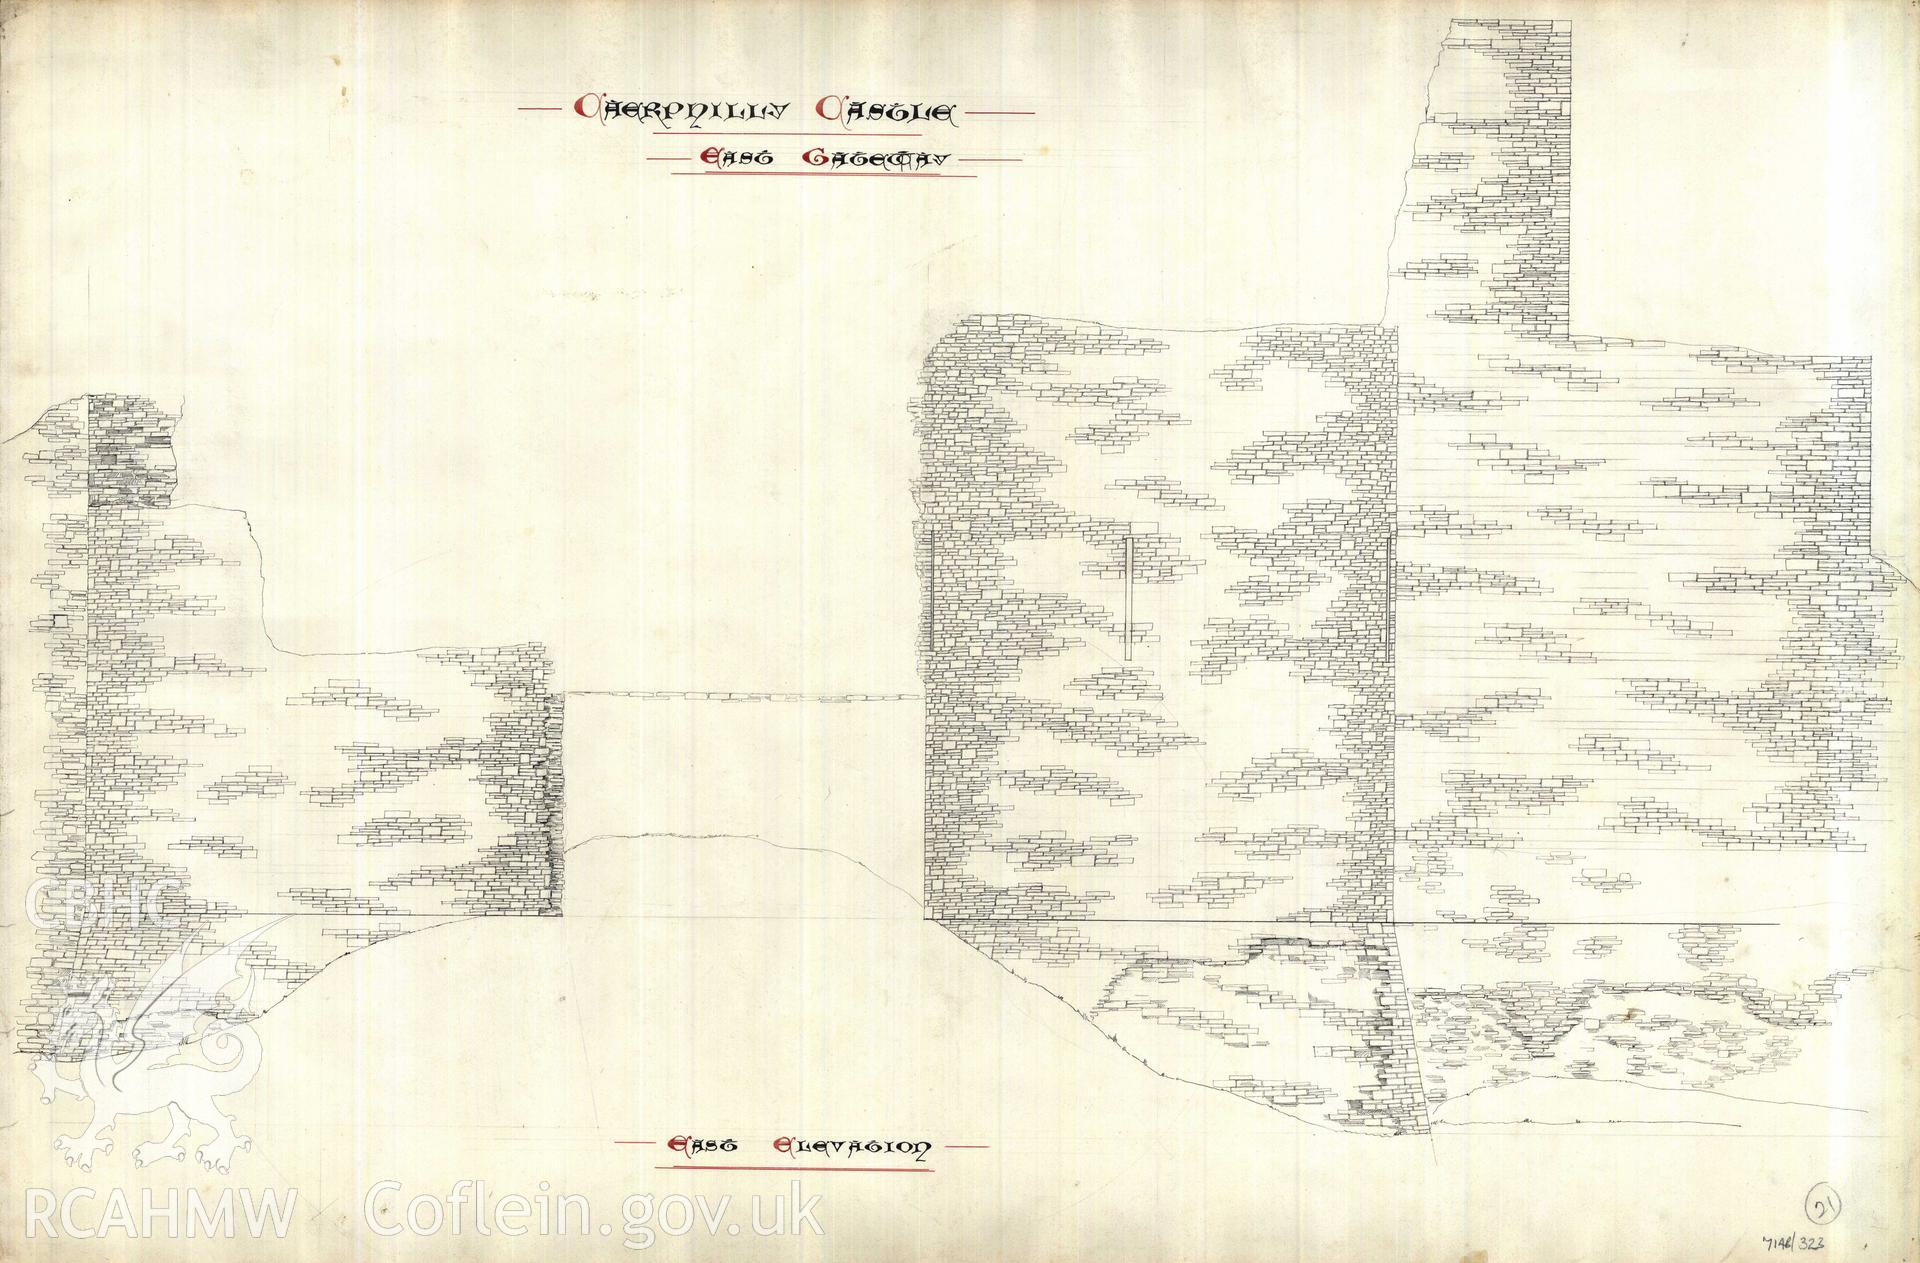 Cadw guardianship monument drawing of Caerphilly Castle. Mid E gate, E (ext) elev. Cadw Ref. No:714B/323. Scale 1:24.